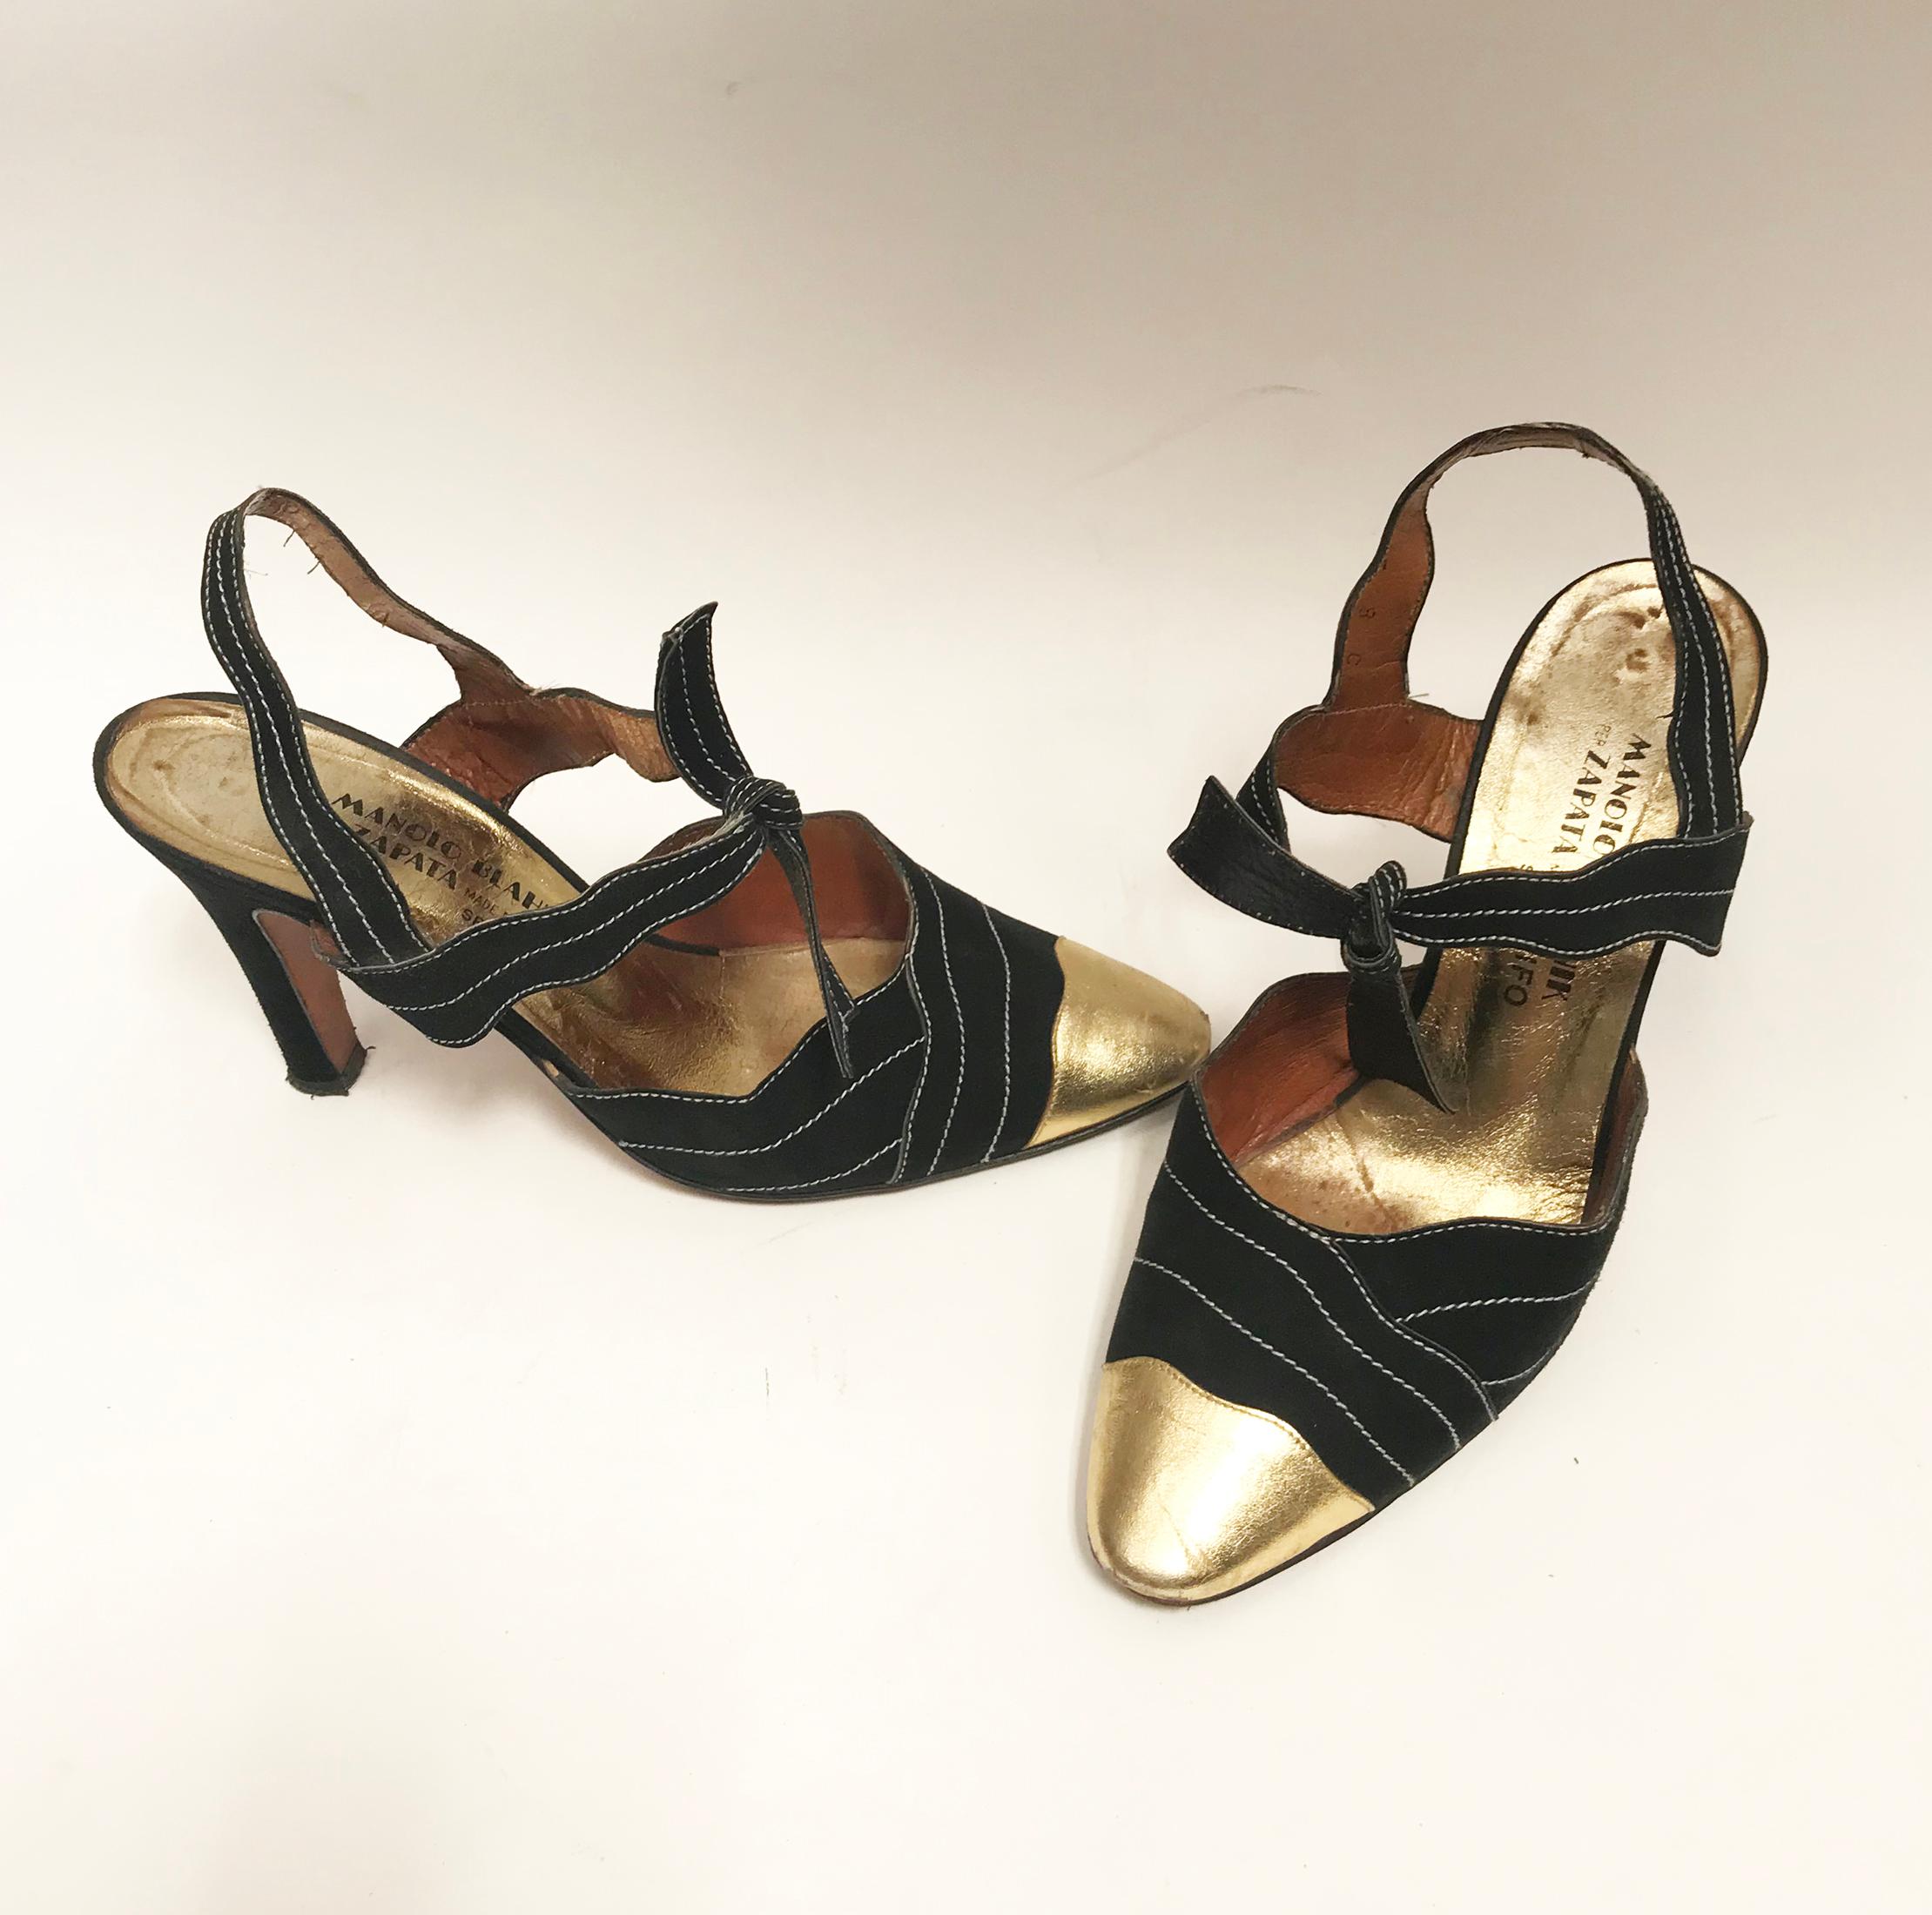 Gorgeous Manolo Blahnik Black Suede and Gold Leather shoes.
These shoes are from the very beginning of his career when he started designing shoes in London  for the Fashion Shop  Zapata.
Size is European 38 from the 70's what today would be a